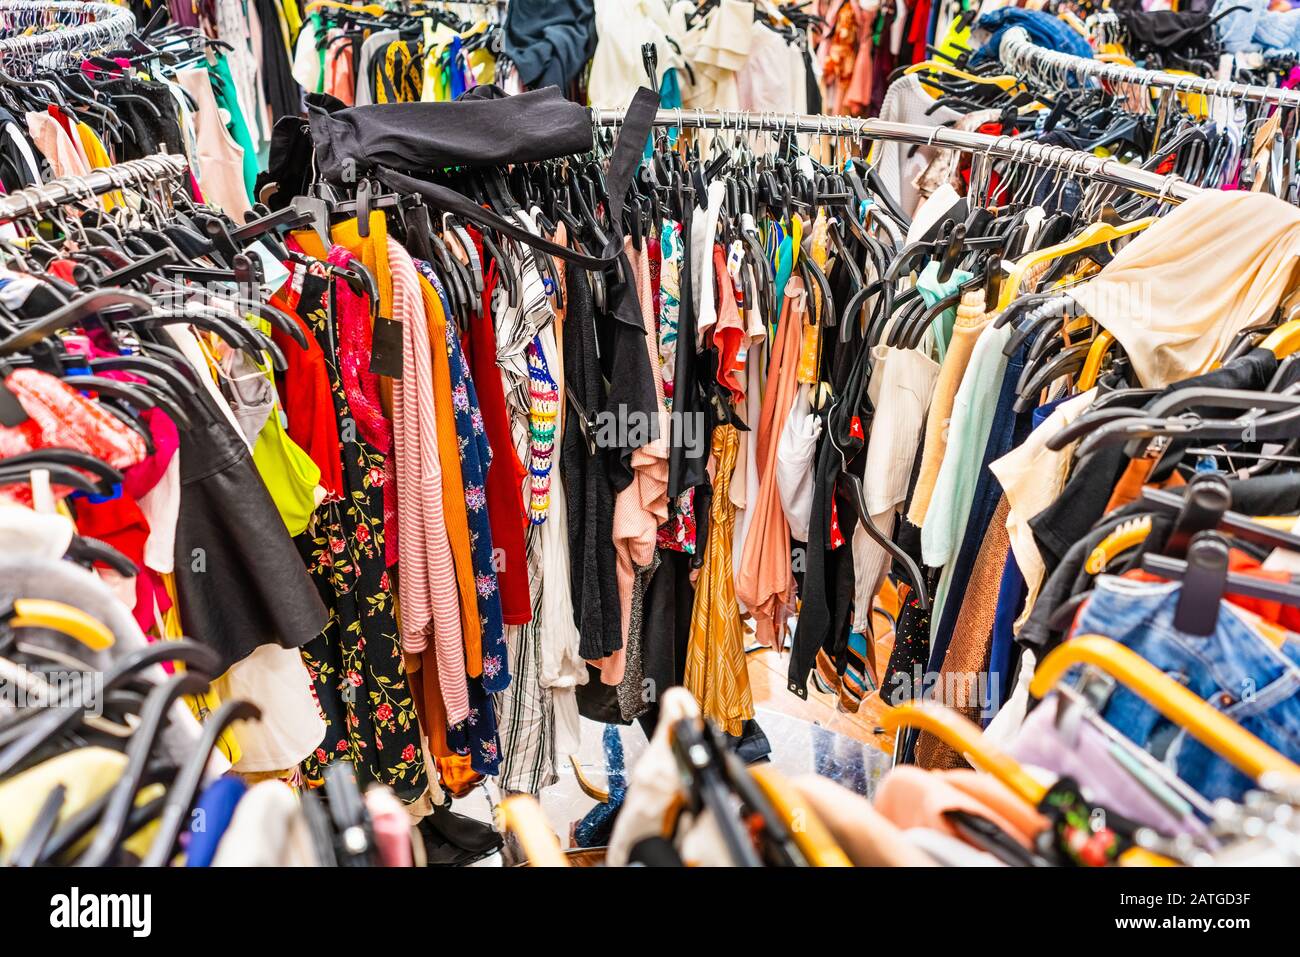 Crowded clearance section in a clothing store, with various colorful garments placed tightly on racks in no particular order; fast fashion concept Stock Photo